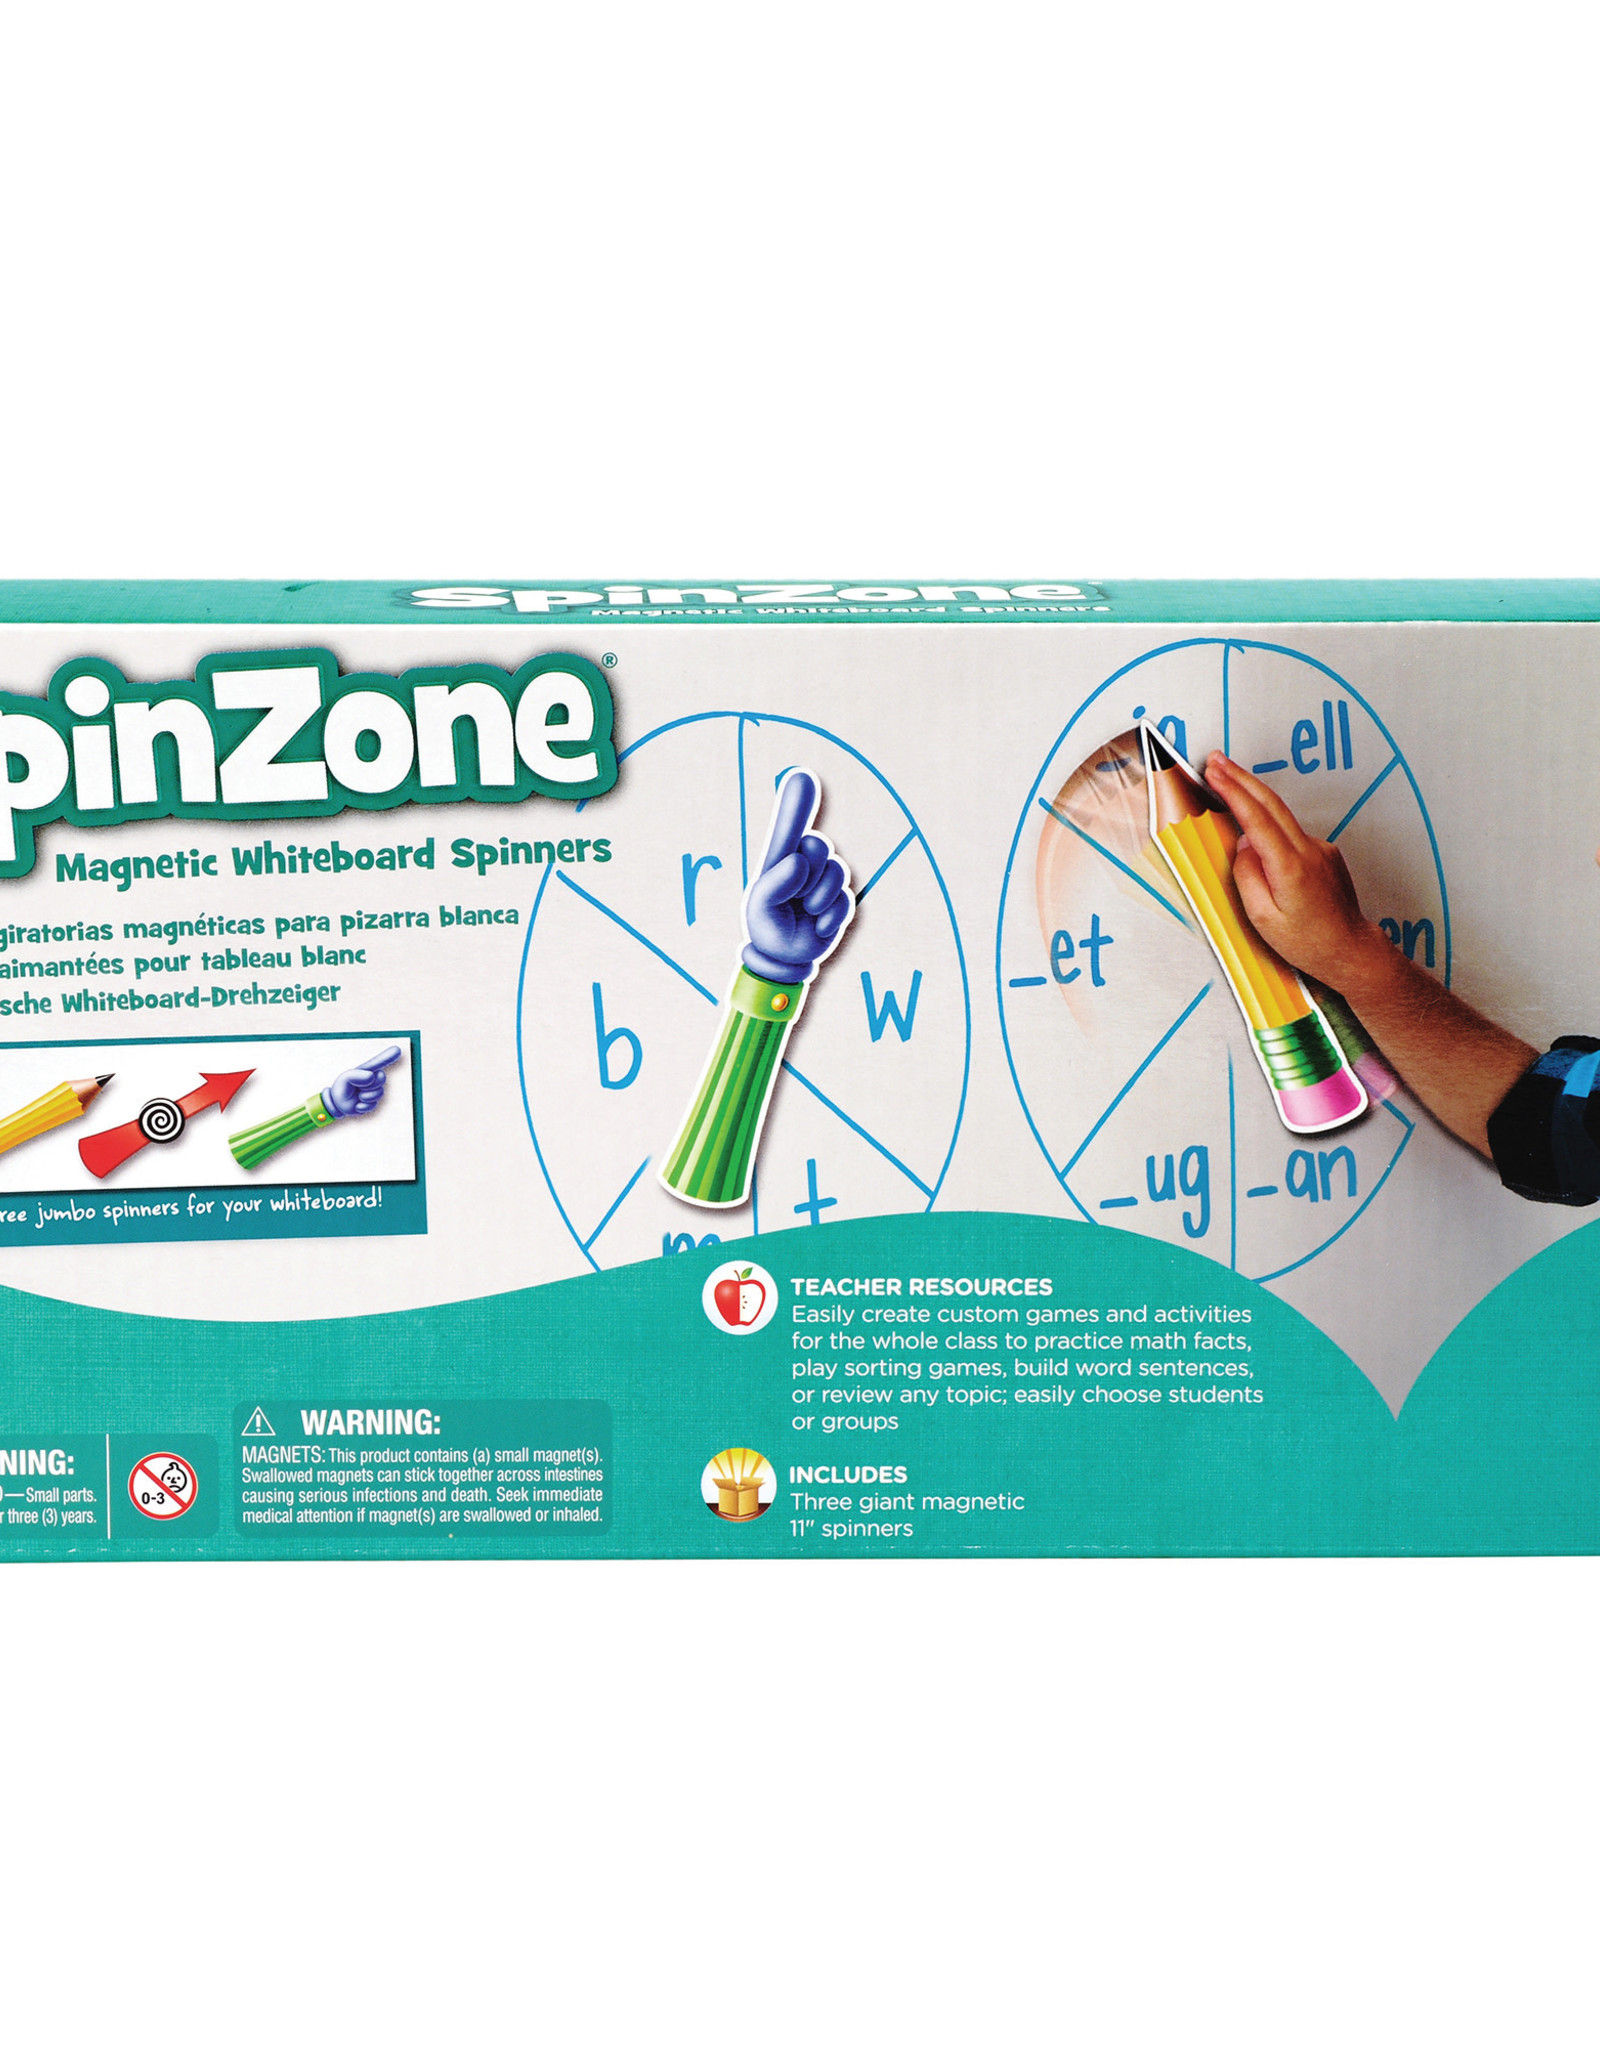 LEARNING EDUCATIONAL SPINZONE